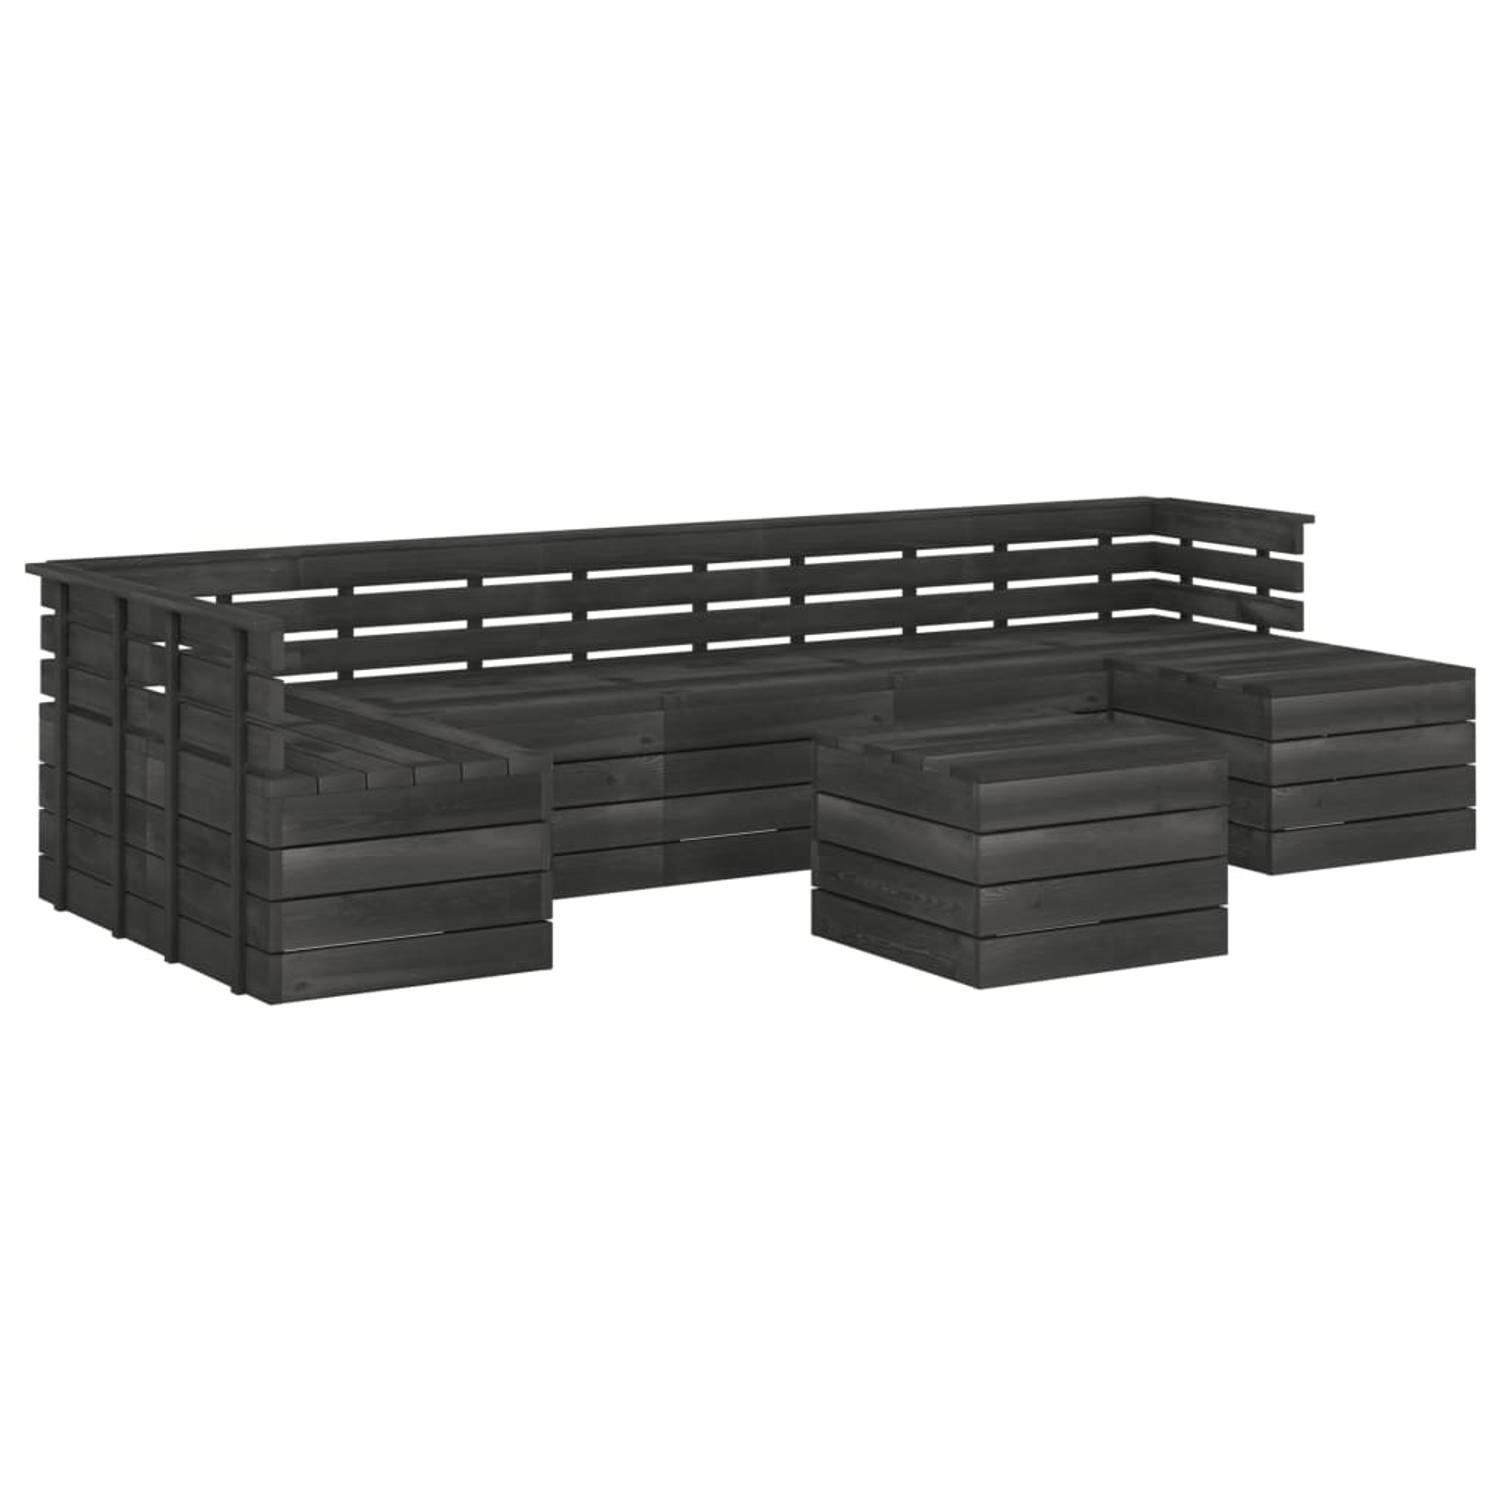 The Living Store 8-delige Loungeset pallet massief grenenhout donkergrijs - Tuinset